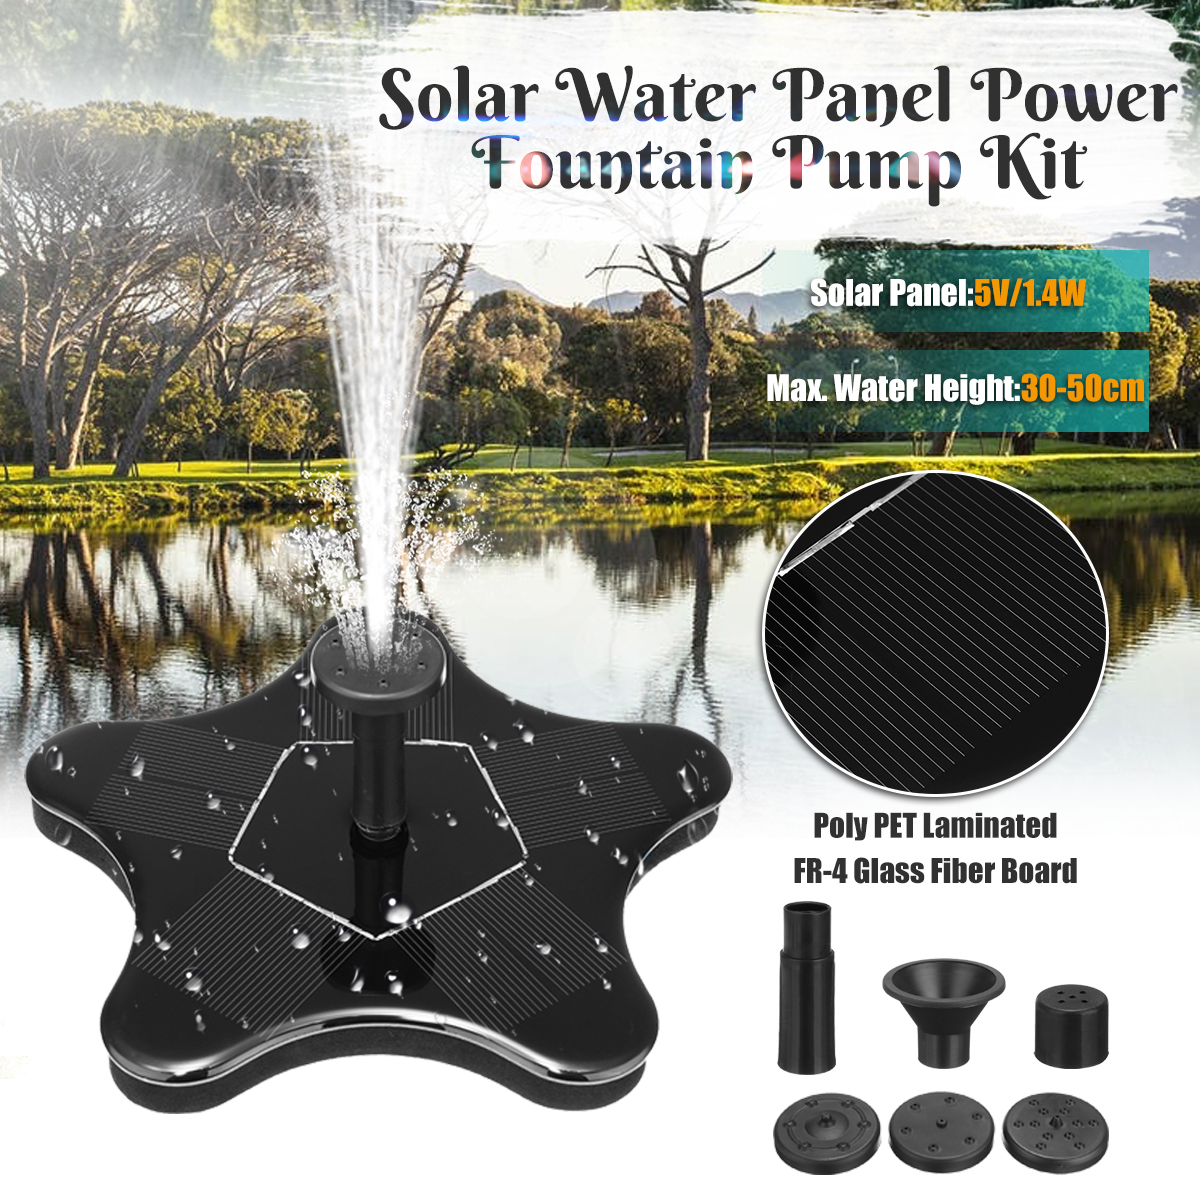 AS50A1-14W-5V-Solar-Panel-Pump-Fountain-Pump-Kit-Pool-Pond-Watering-Submersible-Petals-Fountain-1310319-1